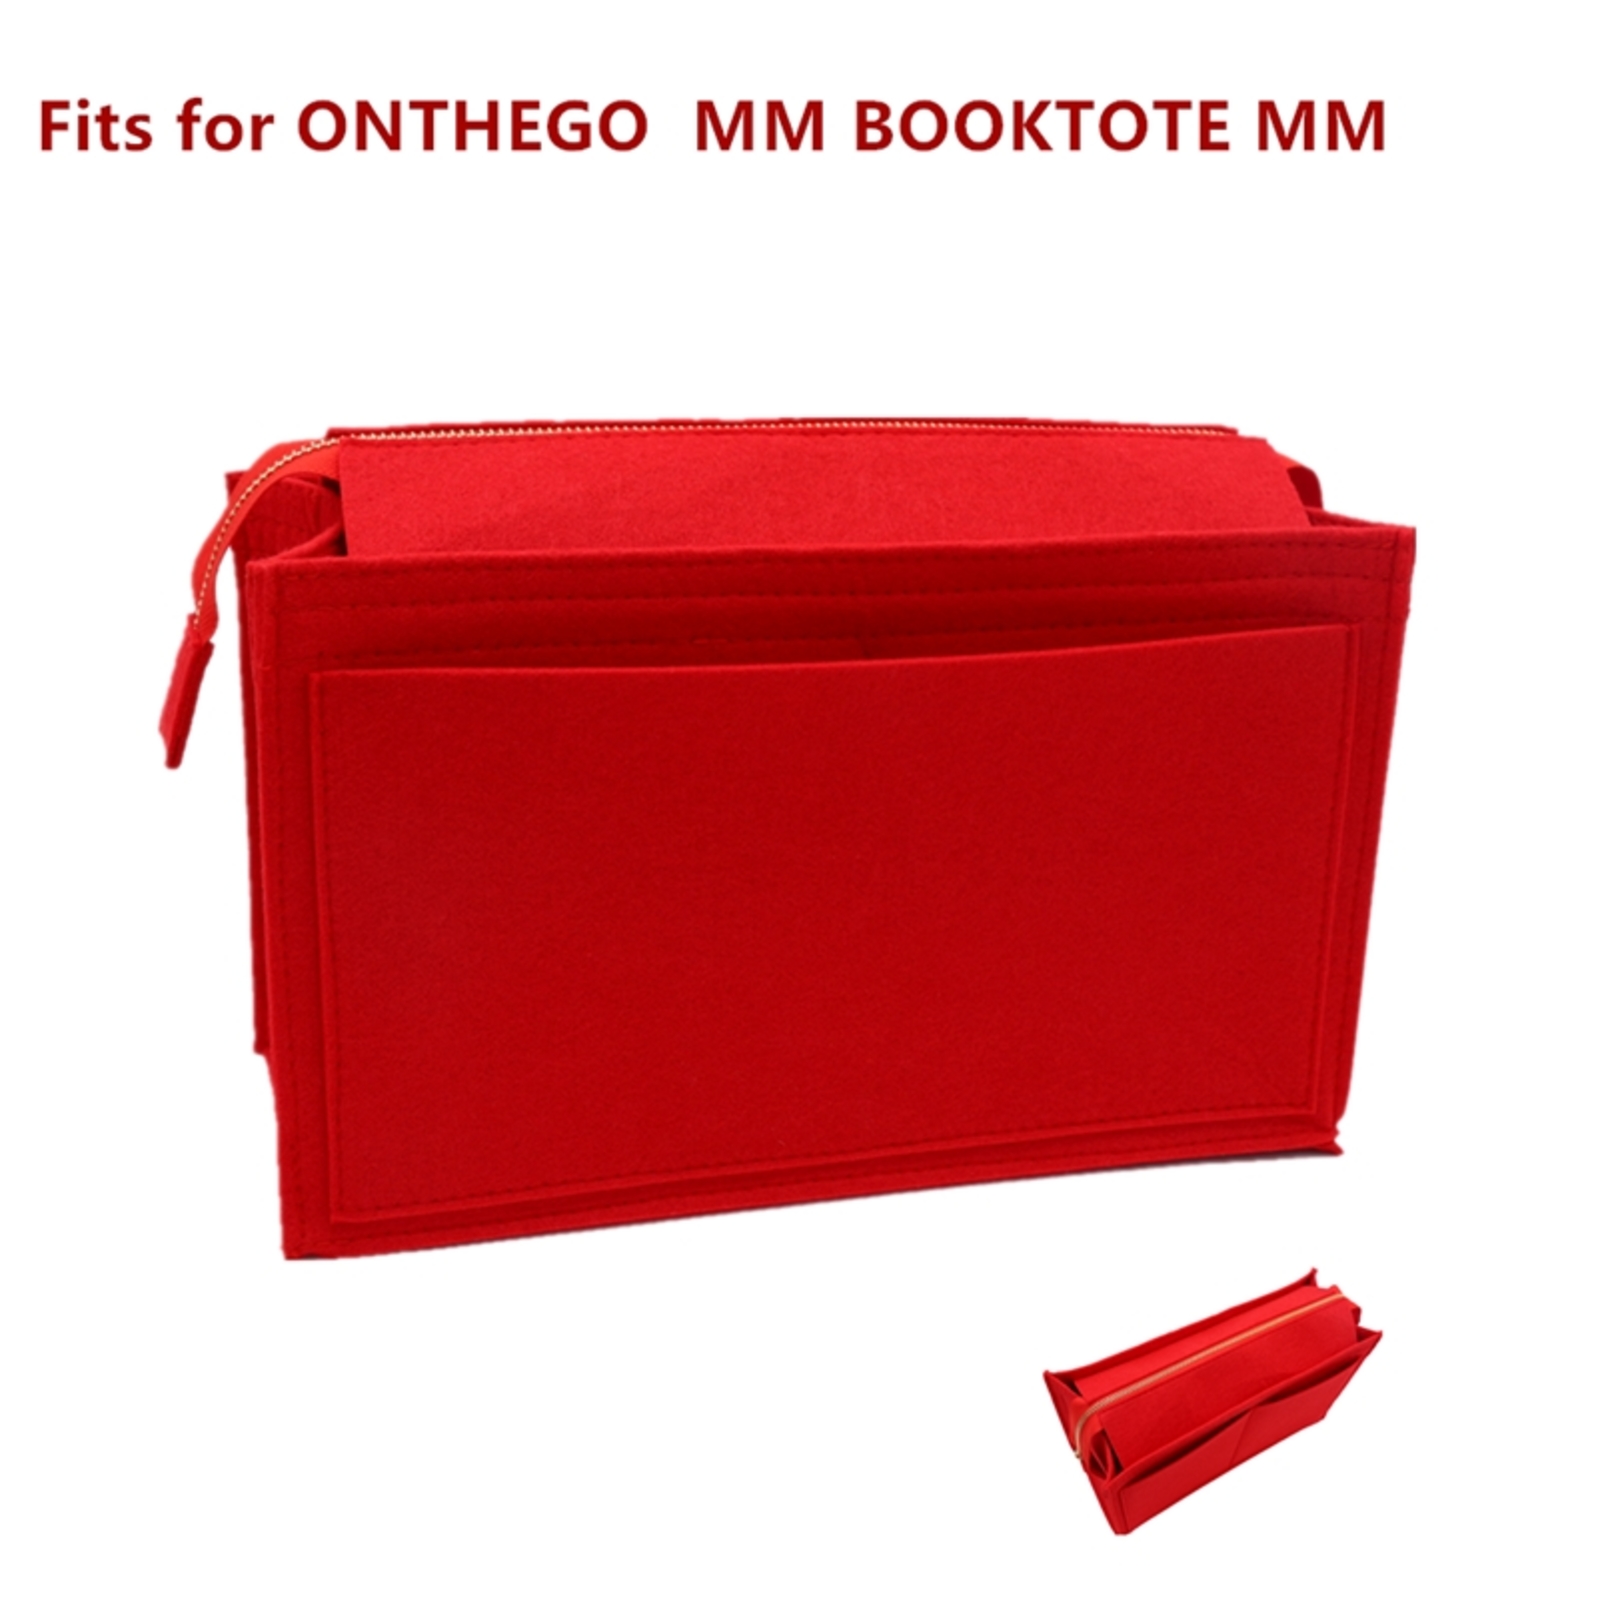 

Fits for onthego MM booktote MM Felt Cloth Insert Bag Organizer Makeup Handbag shaper on the go Organizer Portable Cosmetic Bags 220121, 4002red